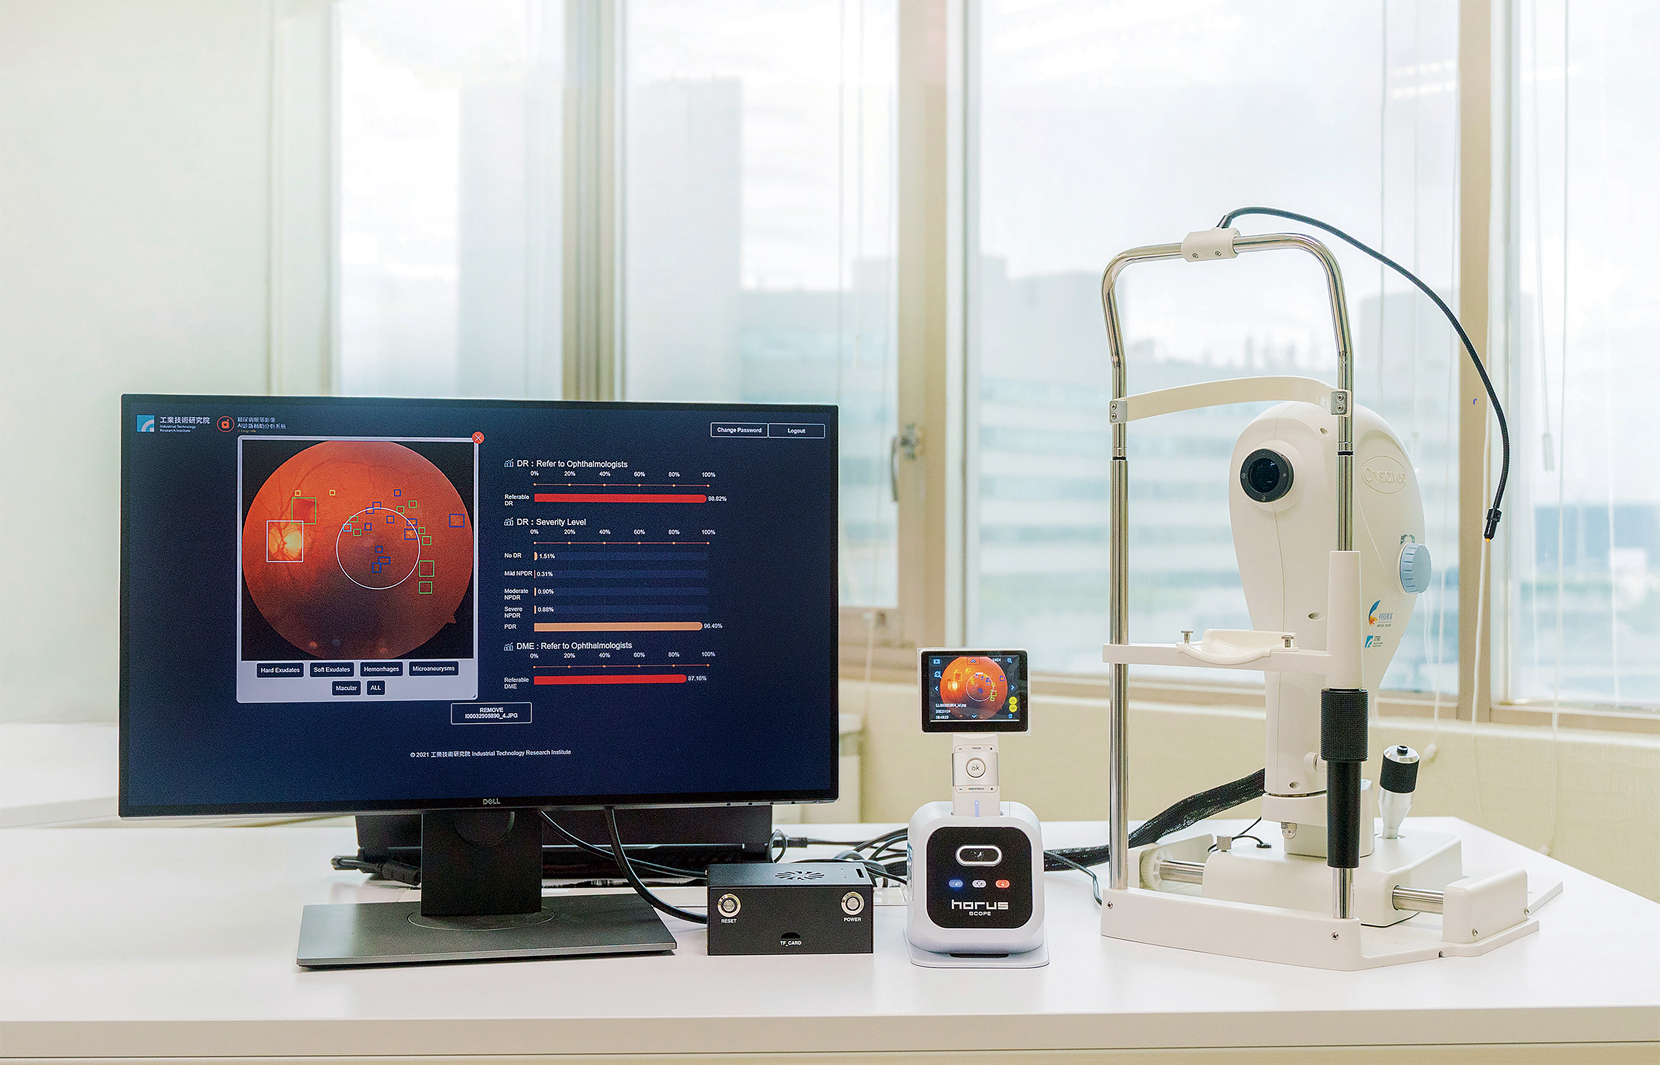 Point-of-Care AI-DR is the first AI-based solution that can locate four main lesions, classify five severity levels of DR, and determine whether a patient should be referred to an ophthalmologist.